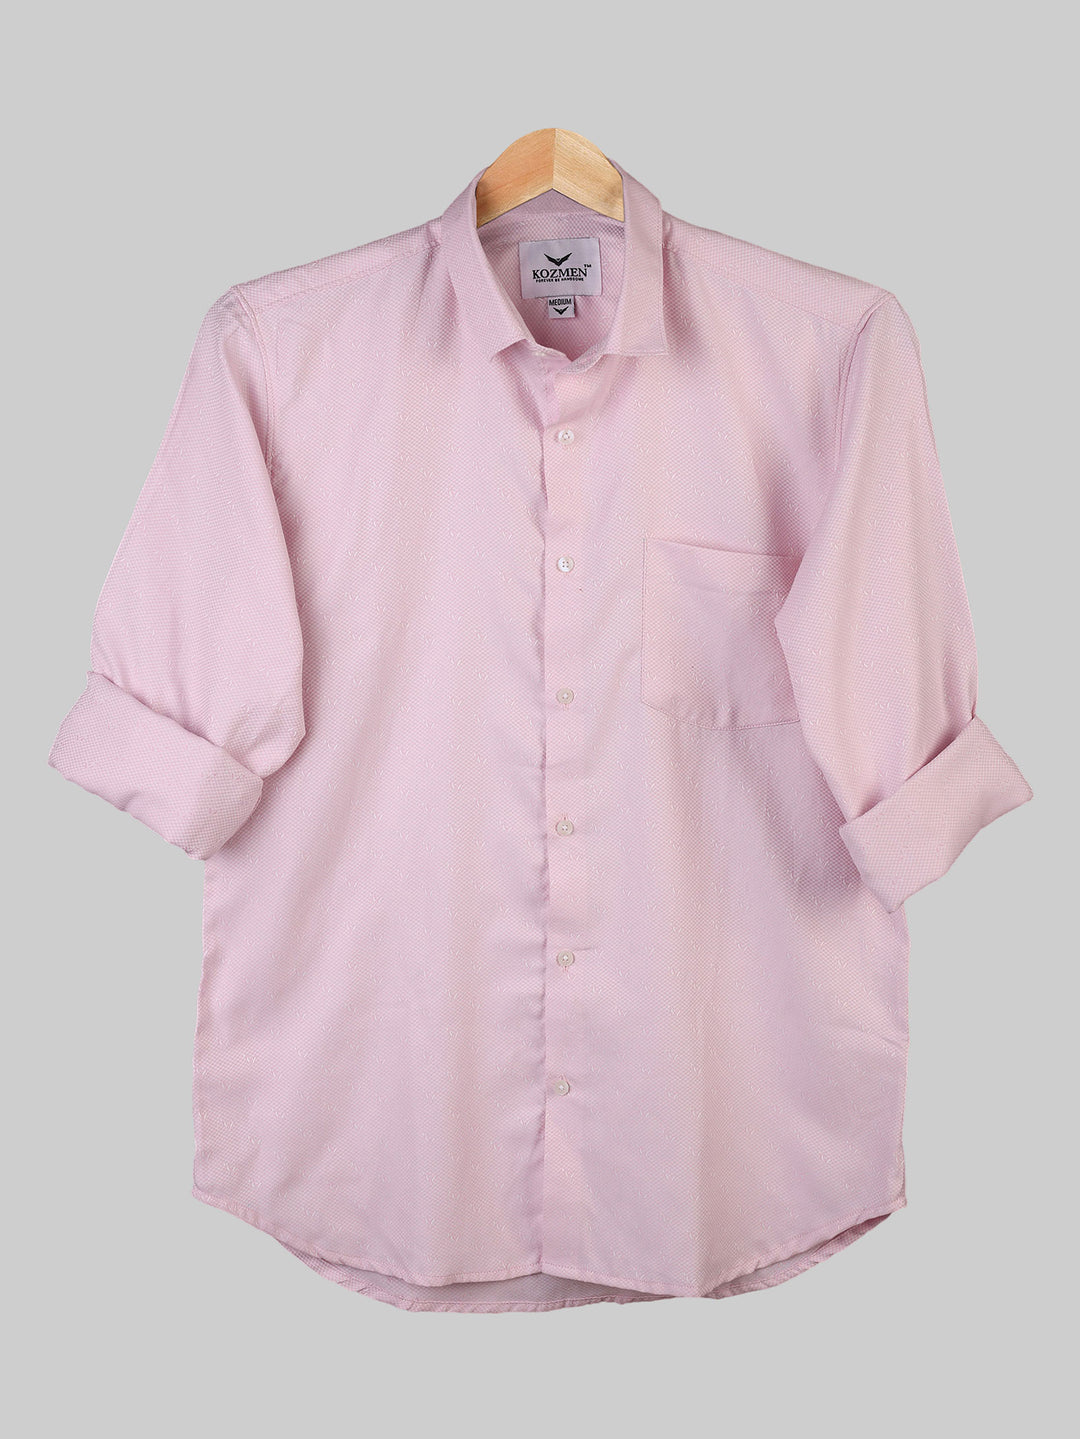 Soft Pink Cotton Casual with Micro Leaf Print Shirt